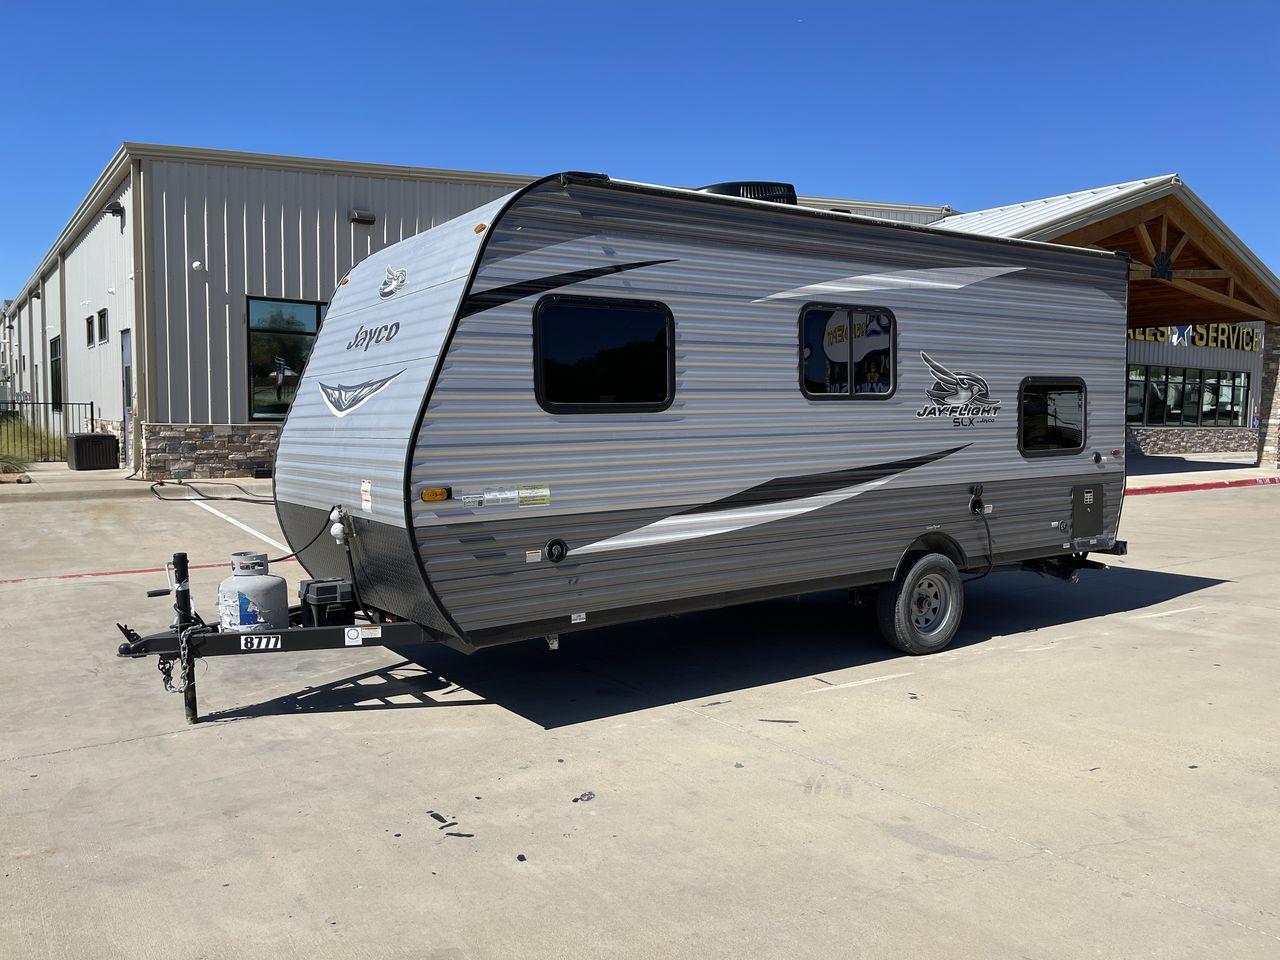 2021 JAYCO JAY FLIGHT SLX 174BH (1UJBJ0AJ1M1) , Length: 21.67 ft | Dry Weight: 3,075 lbs | GVWR: 3,950 lbs | Slides: 0 transmission, located at 4319 N Main Street, Cleburne, TX, 76033, (817) 221-0660, 32.435829, -97.384178 - Take the 2021 Jayco Jay Flight SLX 174BH travel trailer out on your camping adventures. This lightweight and small RV is ideal for people looking for an affordable and cozy way to enjoy the great outdoors. The dimensions of this unit are 21.67 ft in length, 7.08 ft in width, and 9.17 ft in height. I - Photo #23